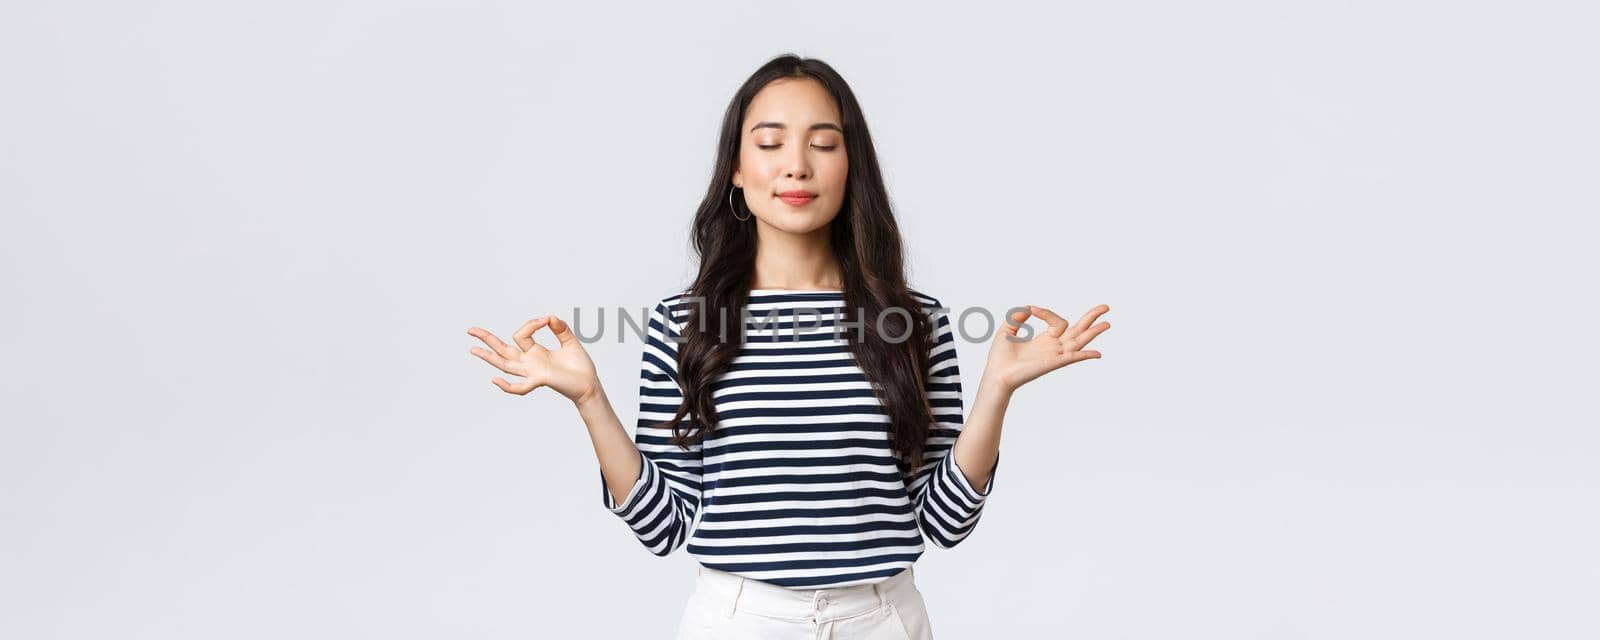 Lifestyle, people emotions and casual concept. Relaxed and patient smiling young asian woman with closed eyes meditating to calm down, do breathing exercises with hands in zen gesture.